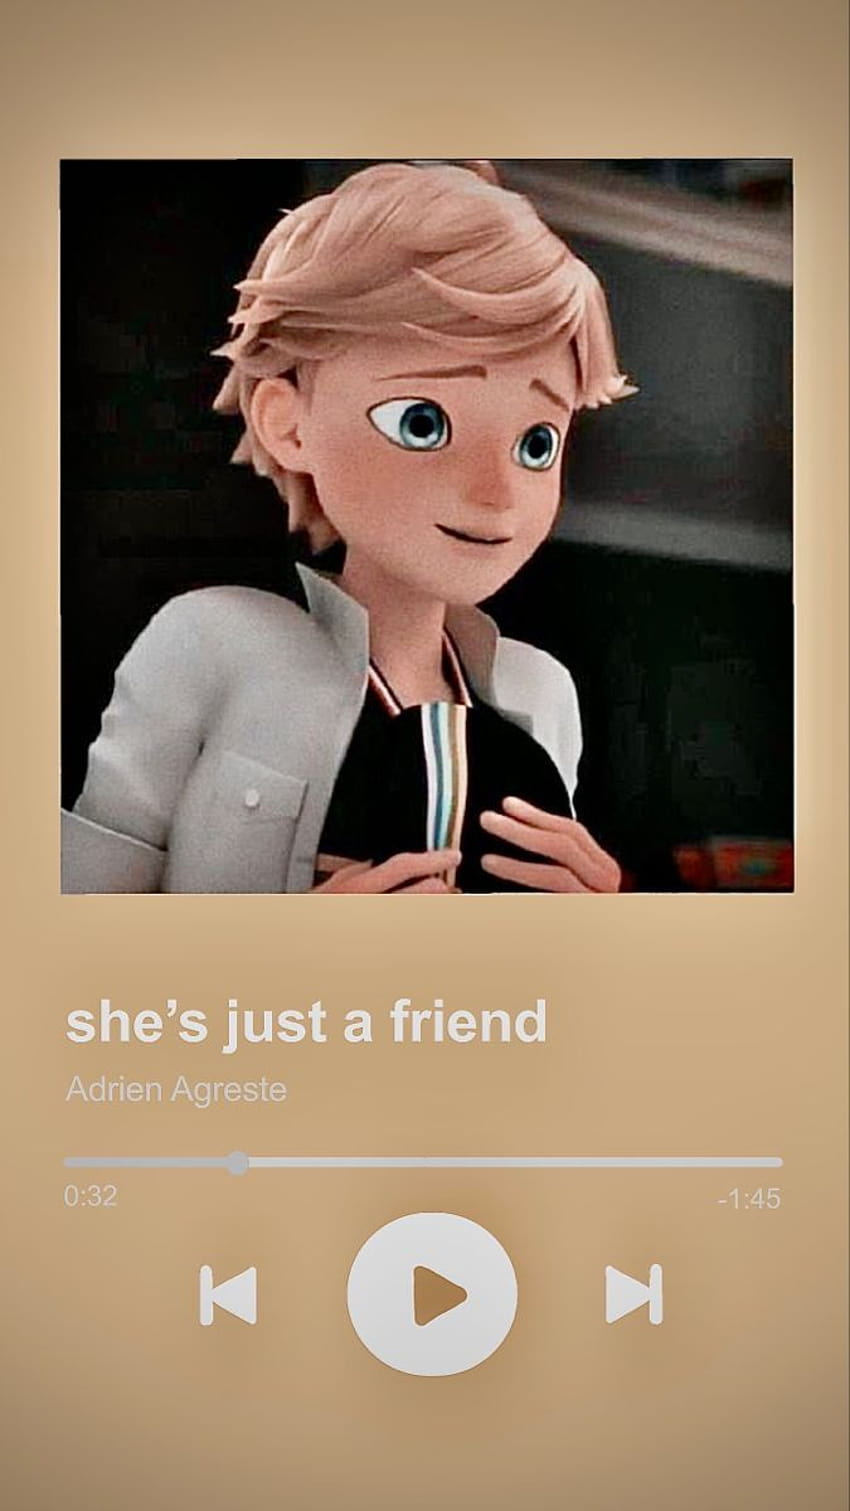 tsk tsk Adrian she's more than a friend and you know it, pink aesthetic adrien agreste HD phone wallpaper